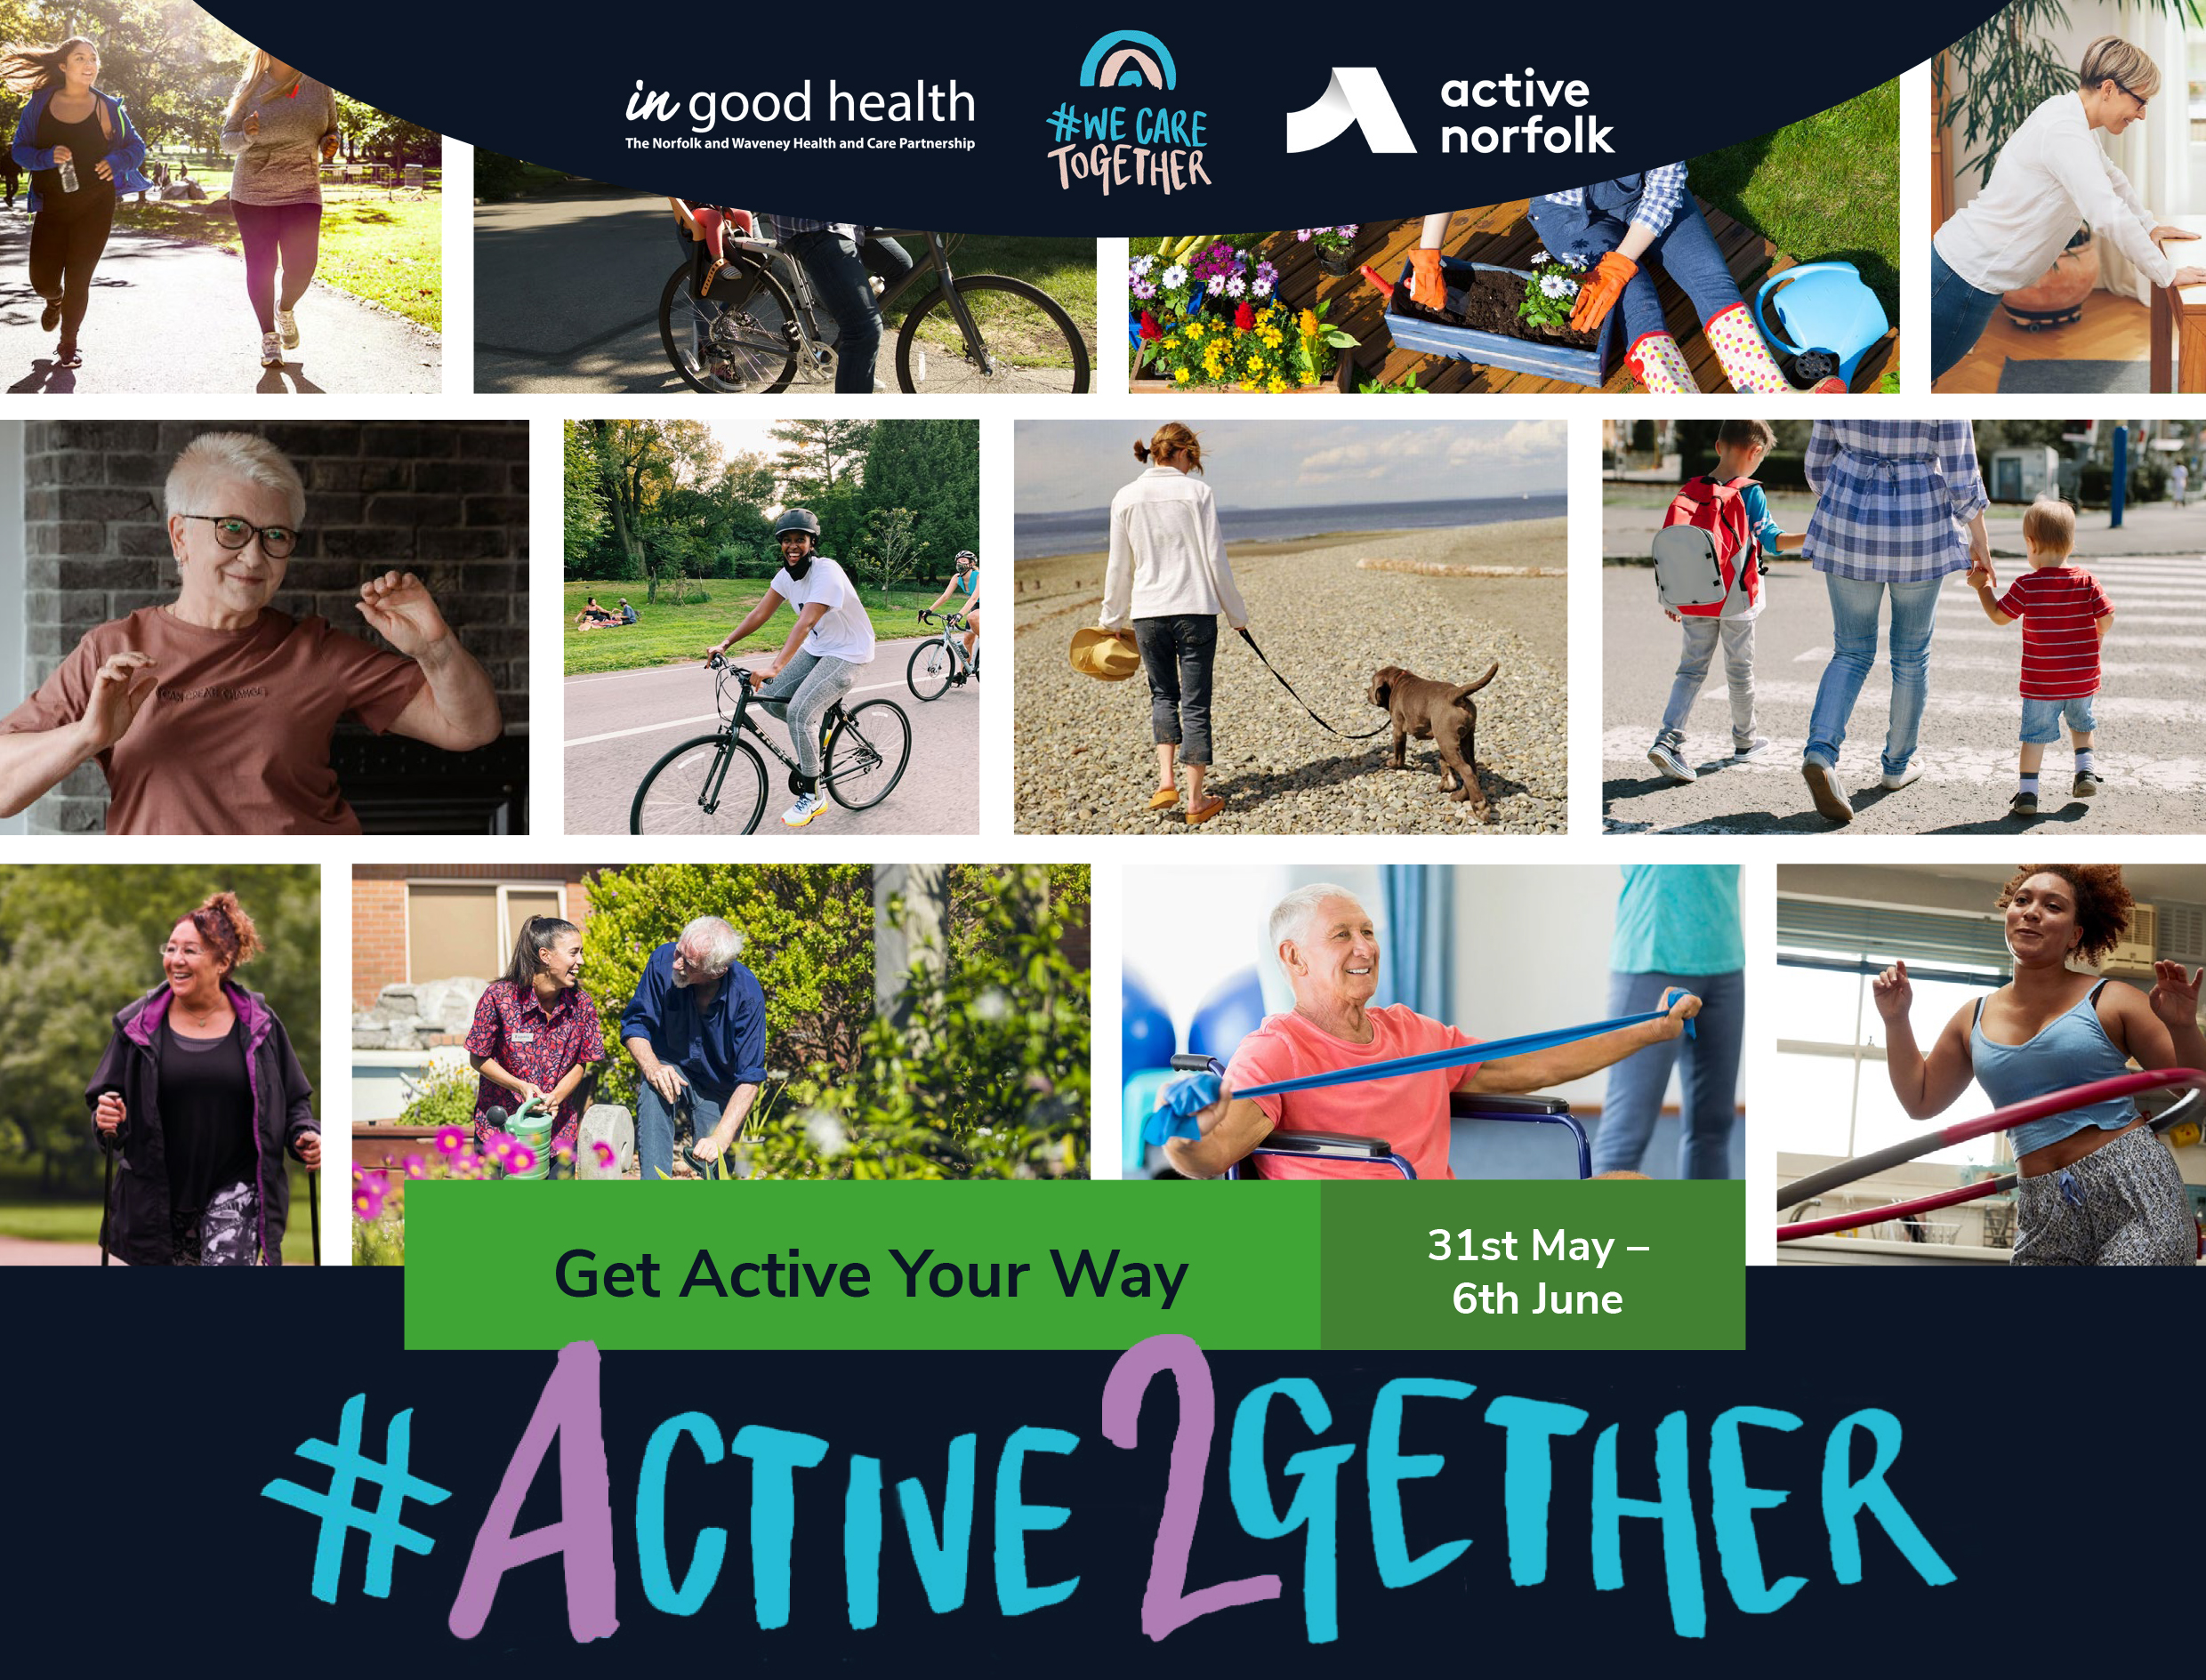 #Active2gether Campaign